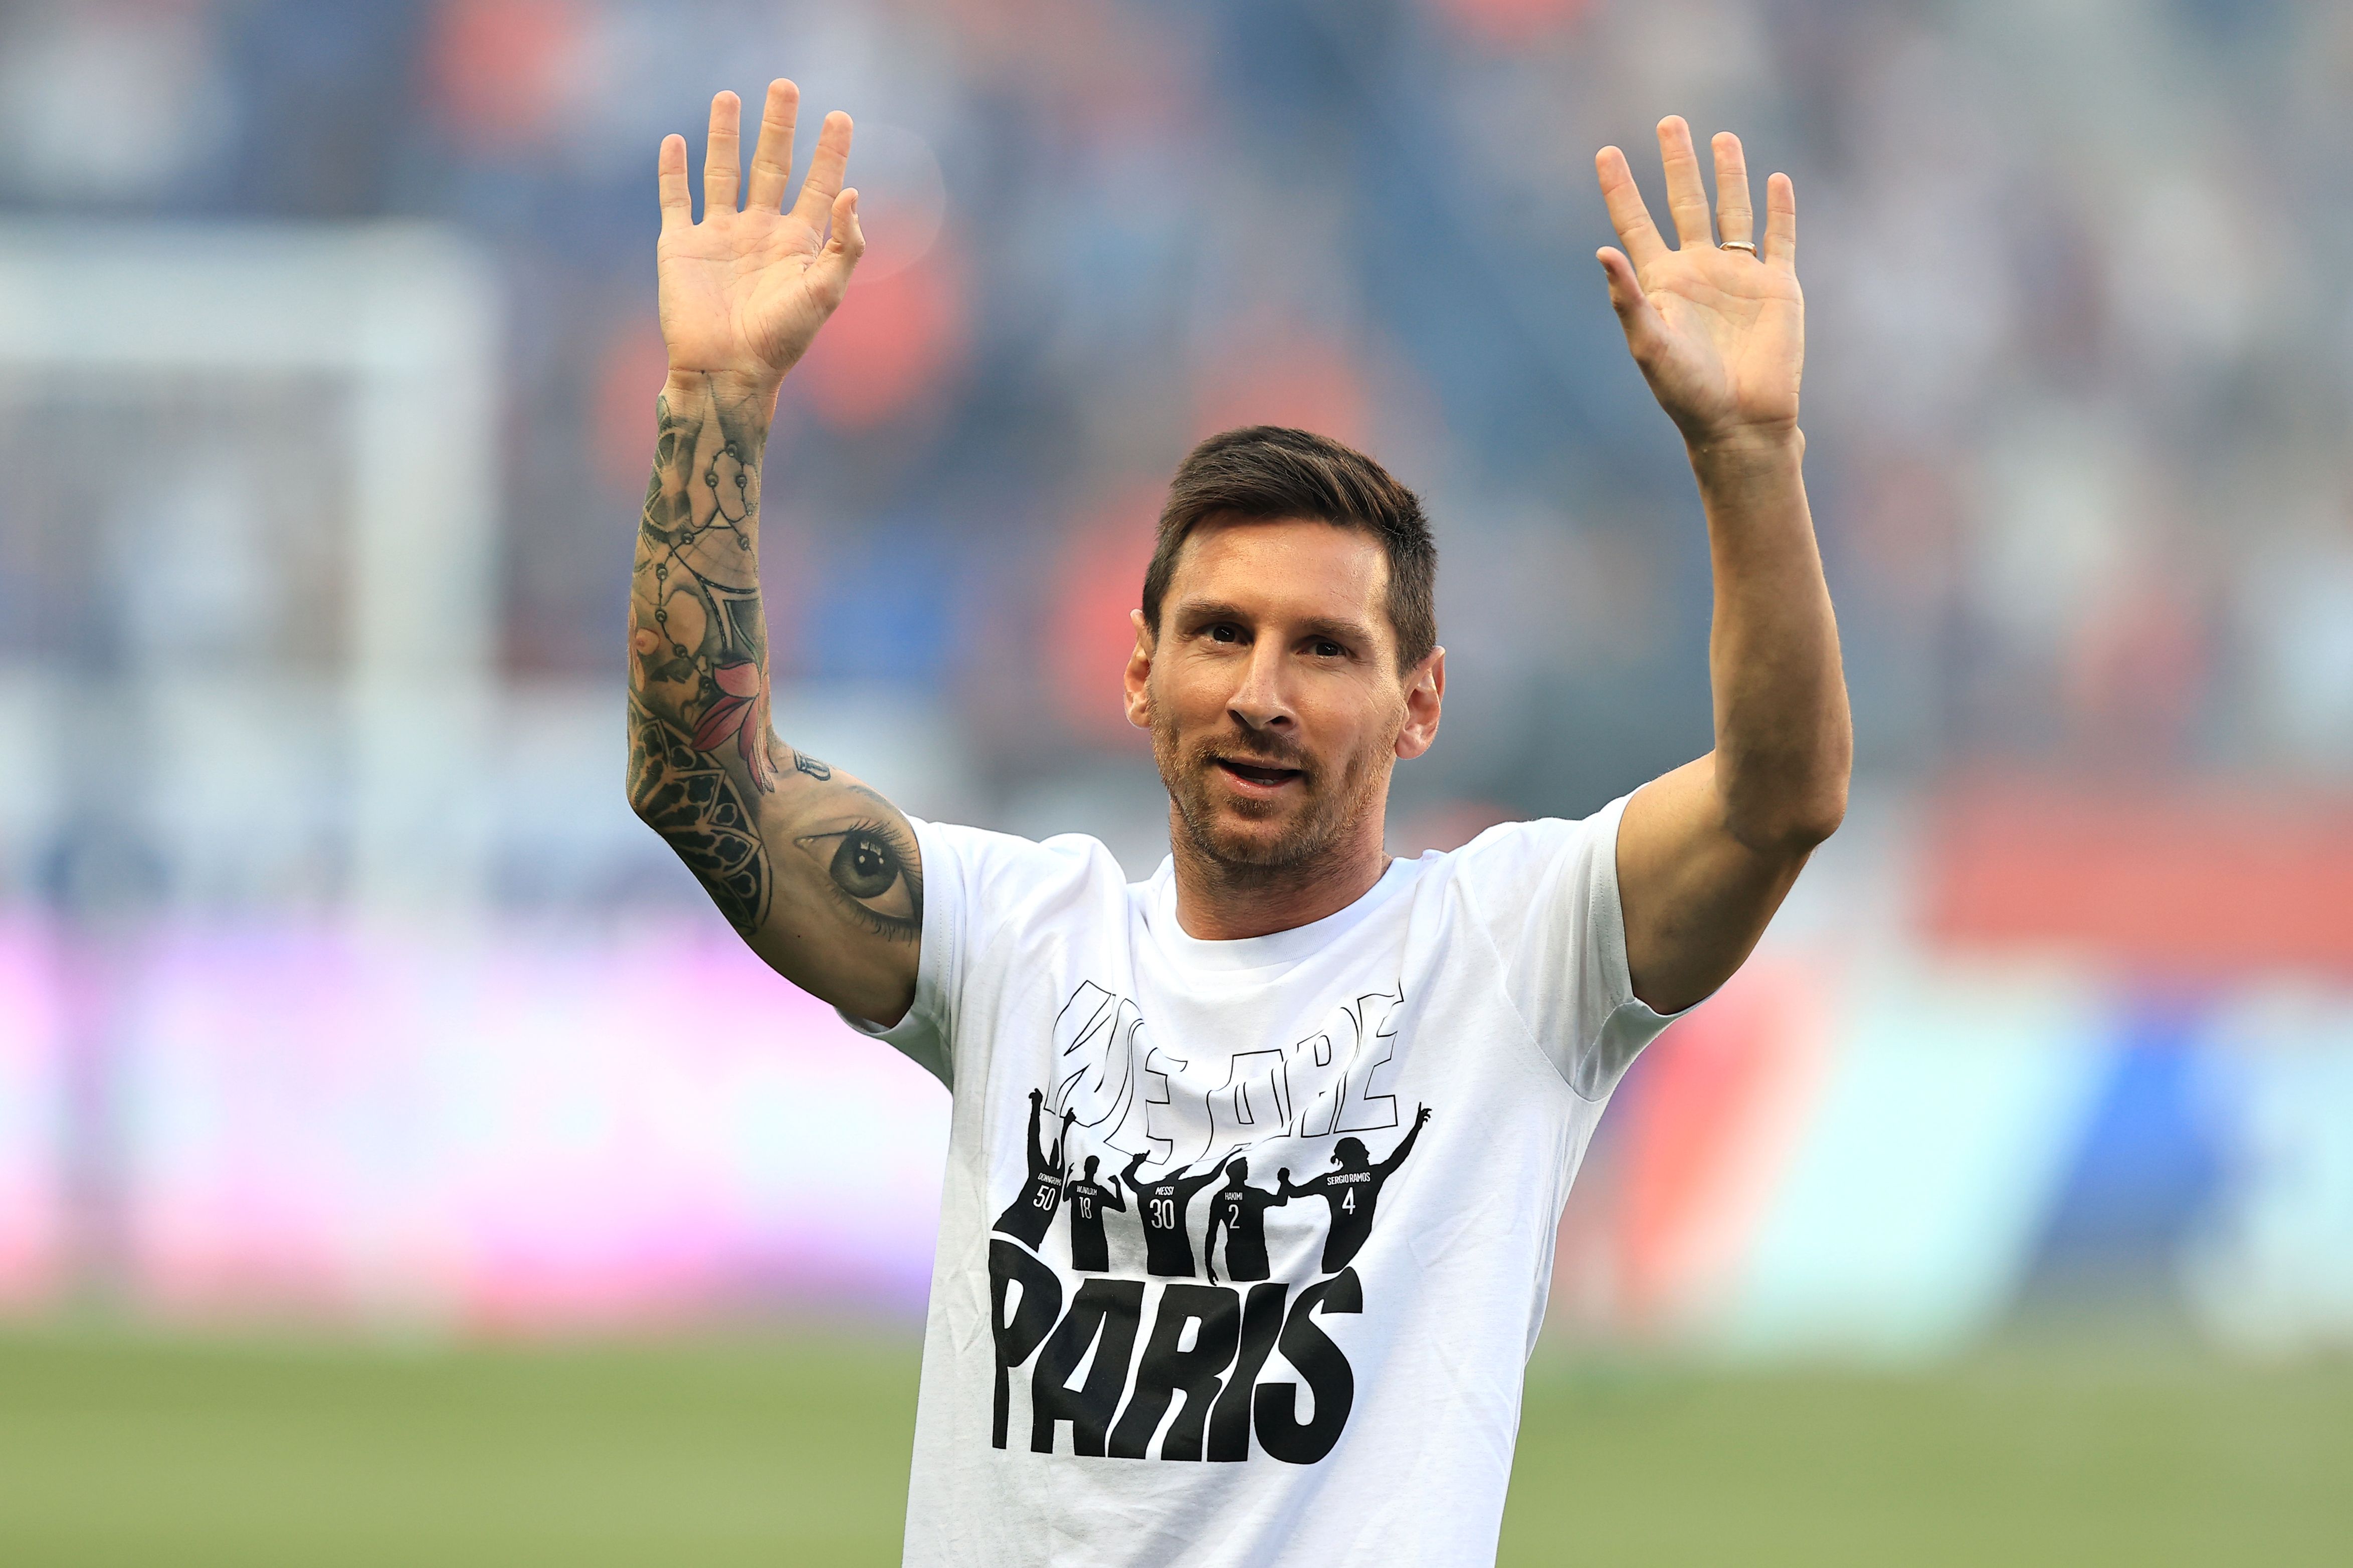 Lionel Messi waves to fans